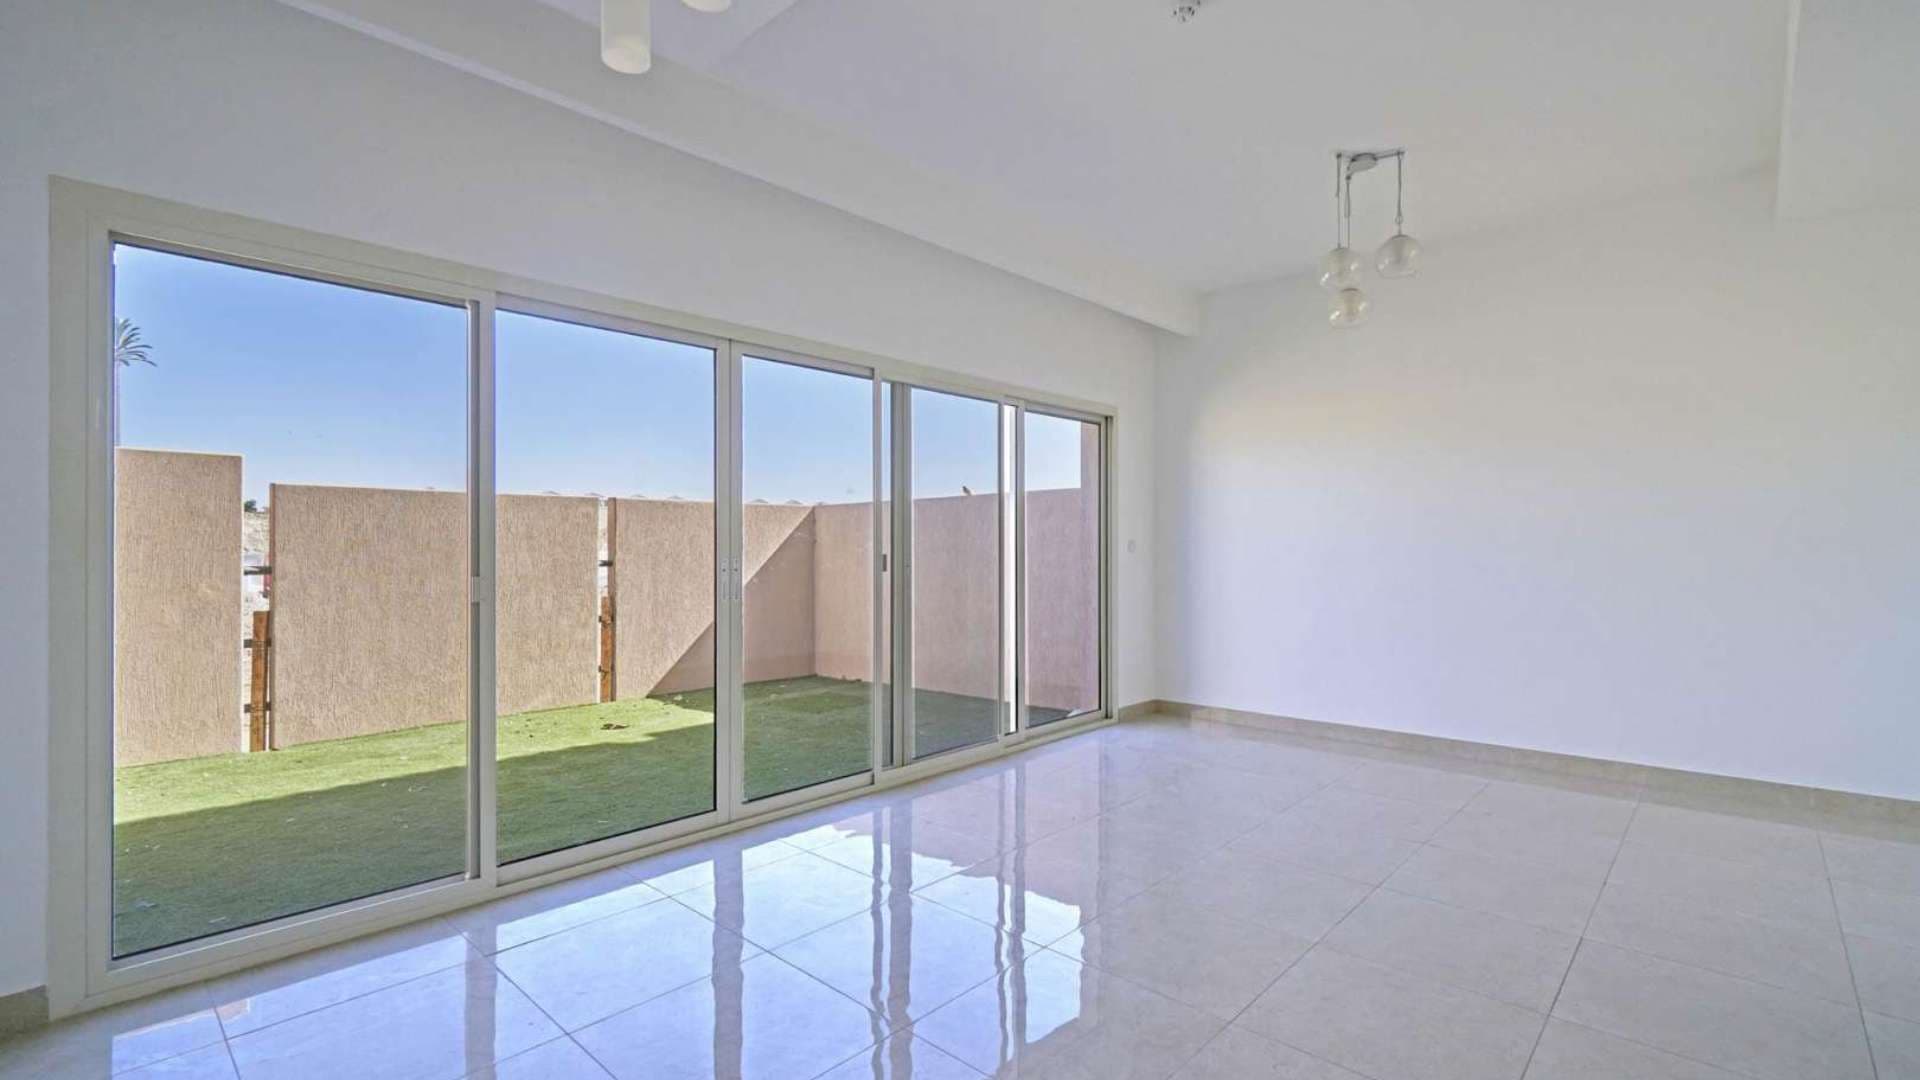 3 Bedroom Townhouse For Sale Al Andalus Townhouses Lp08373 900b17b6a516800.jpg